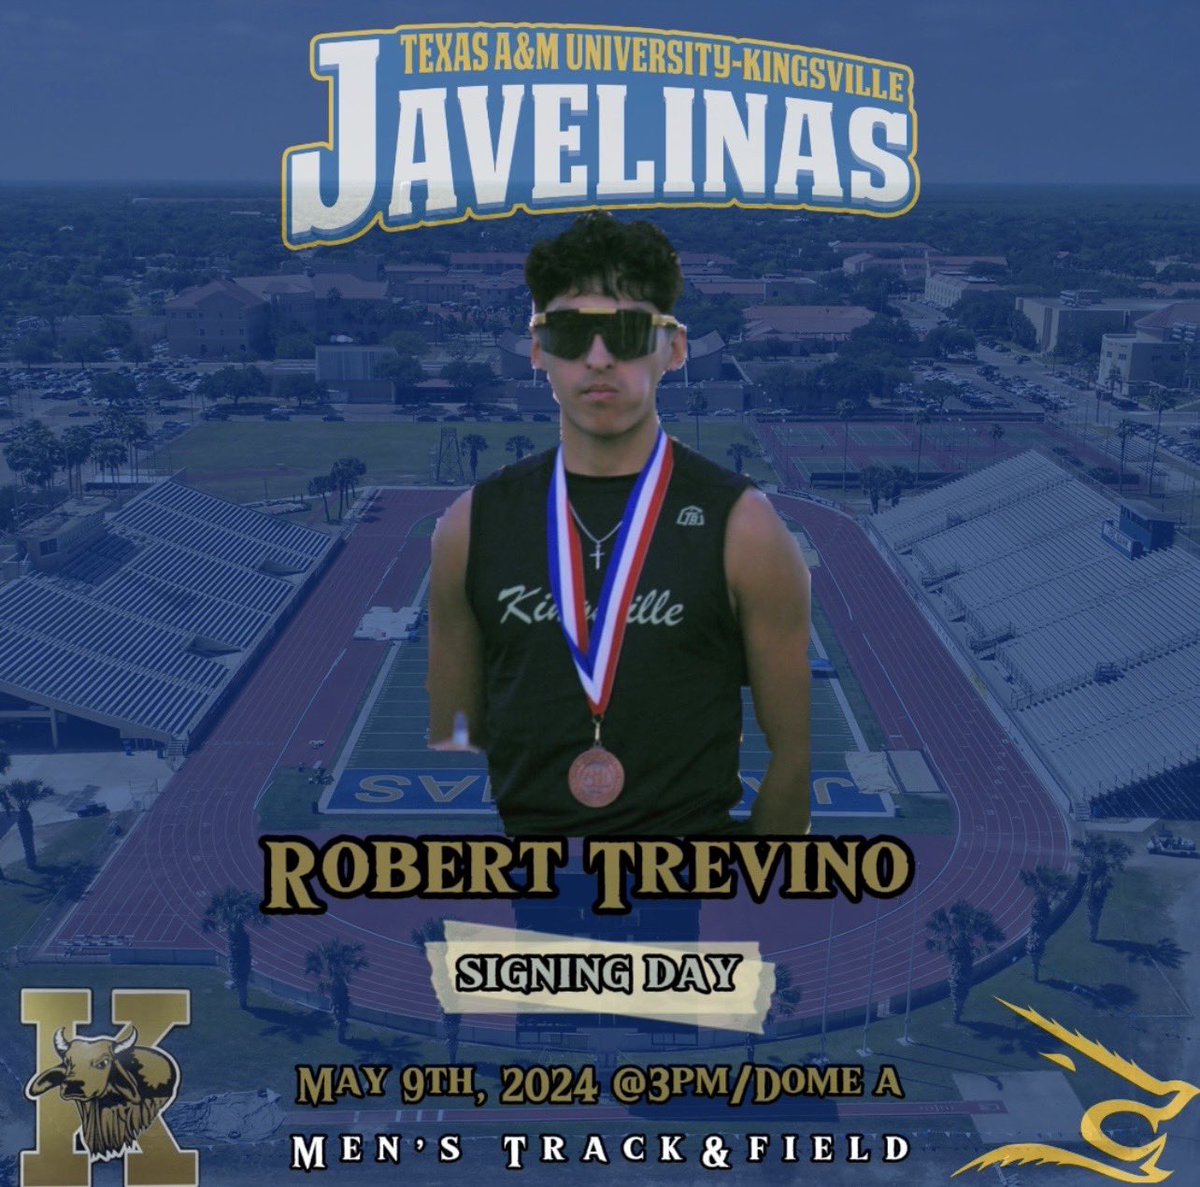 Congratulations to 2024 ATH Robert Trevino on earning the opportunity to continue his academic and athletic career at Texas A&M University-Kingsville for Men’s Track and Field! He will be signing on May 9th at 3pm in Dome A! #RecruitHMK